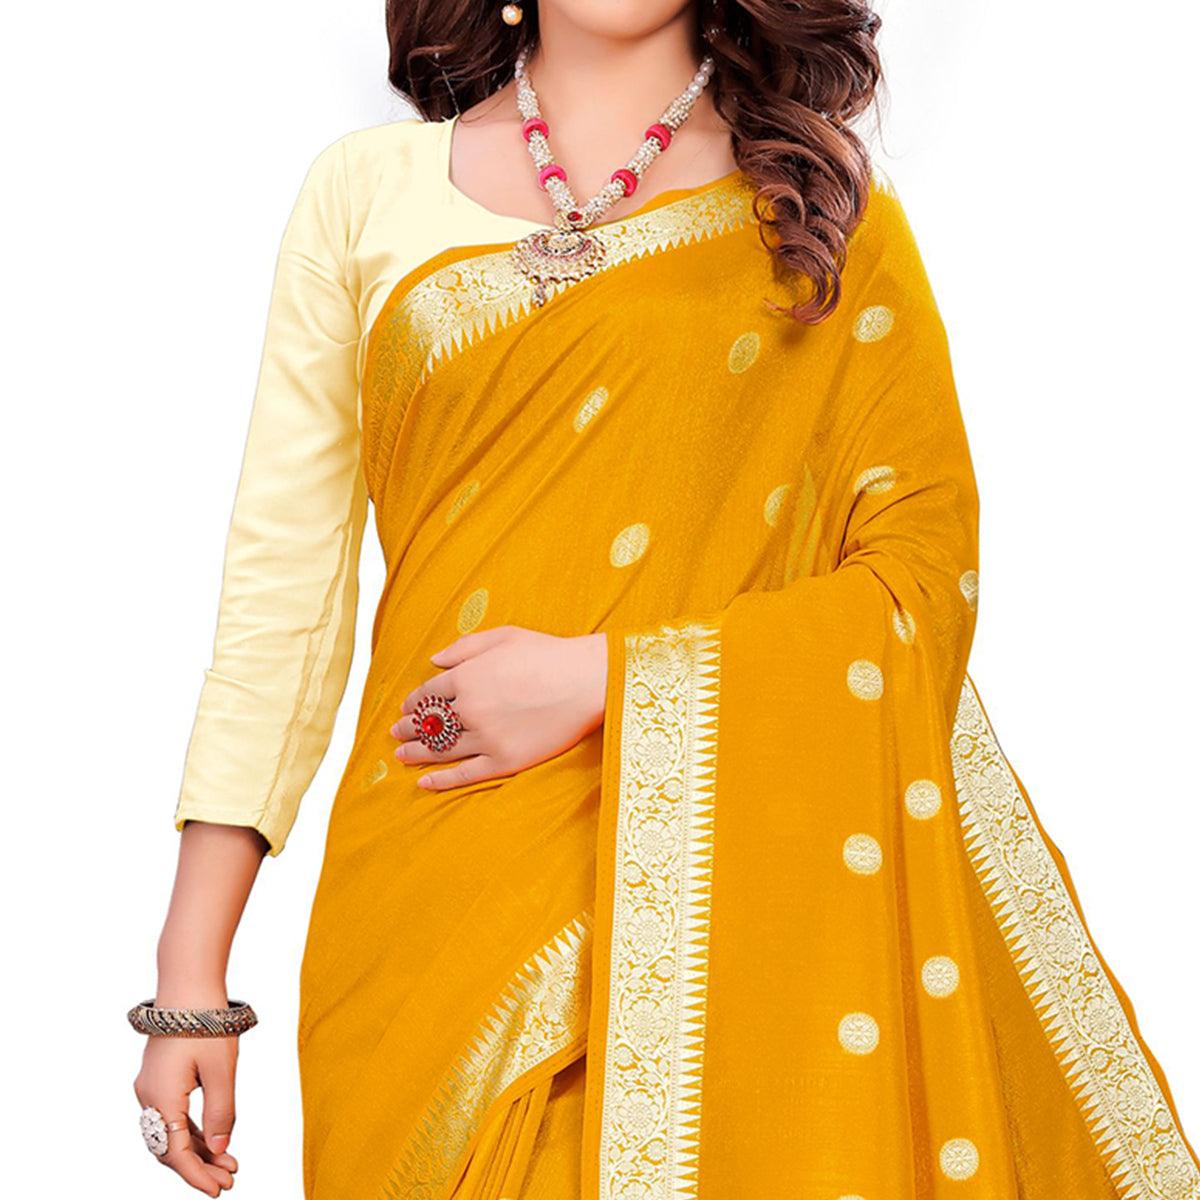 Beautiful Mustard Yellow Colored Casual Wear Embroidered Art Silk Saree With Tassels - Peachmode